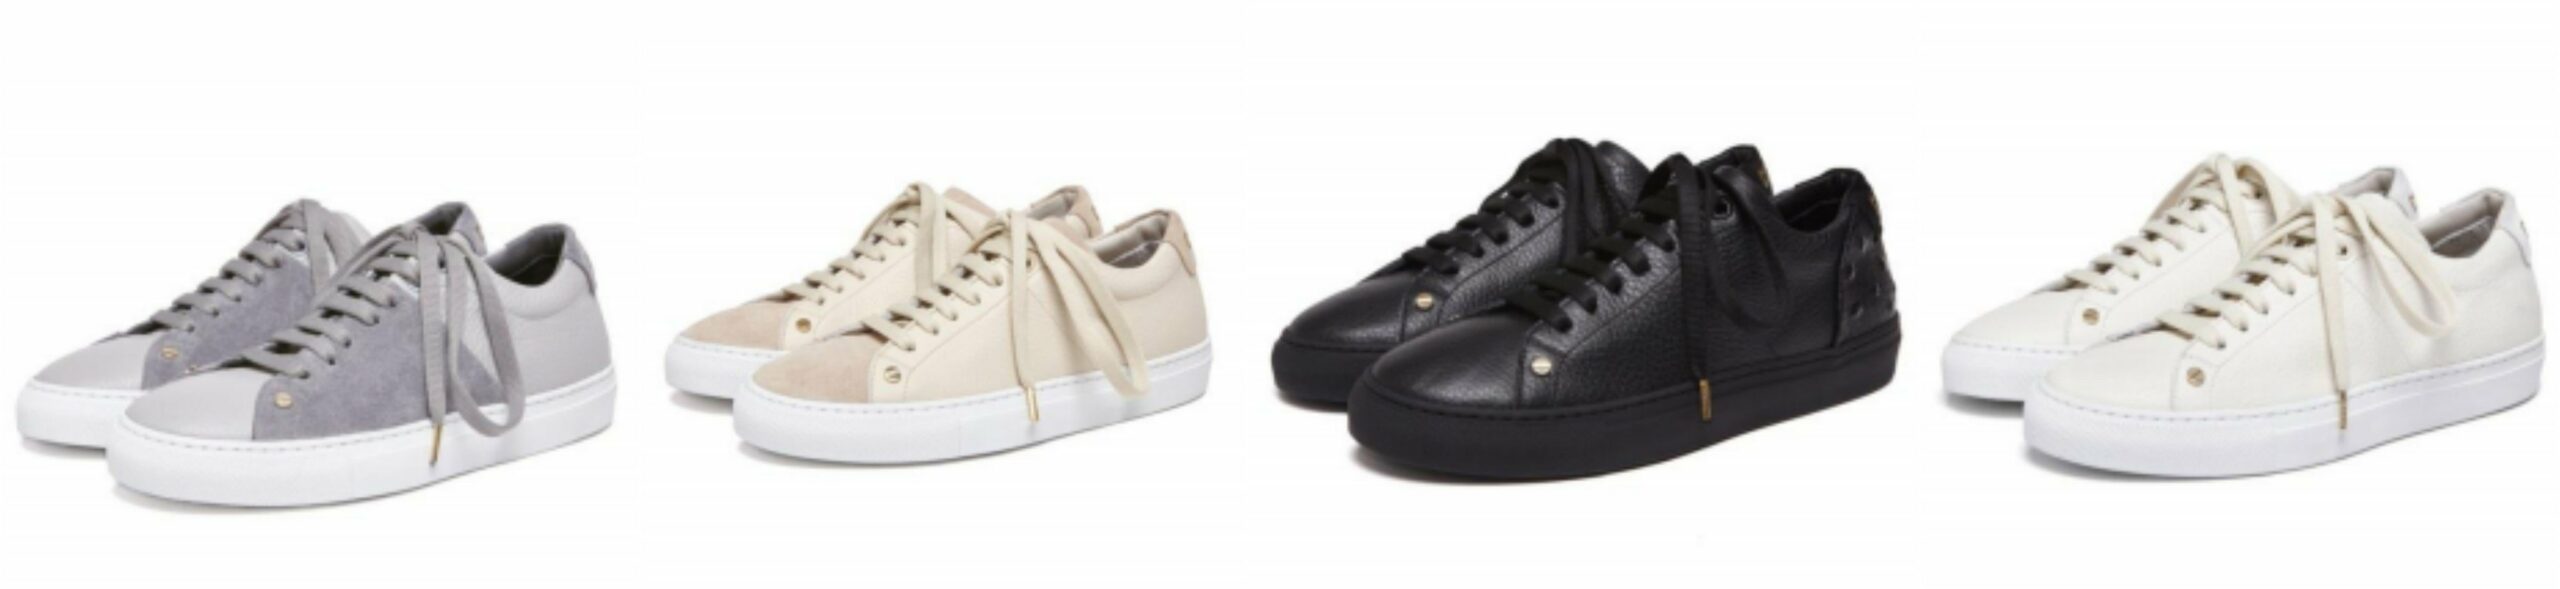 luxury sneakers colleve shoes